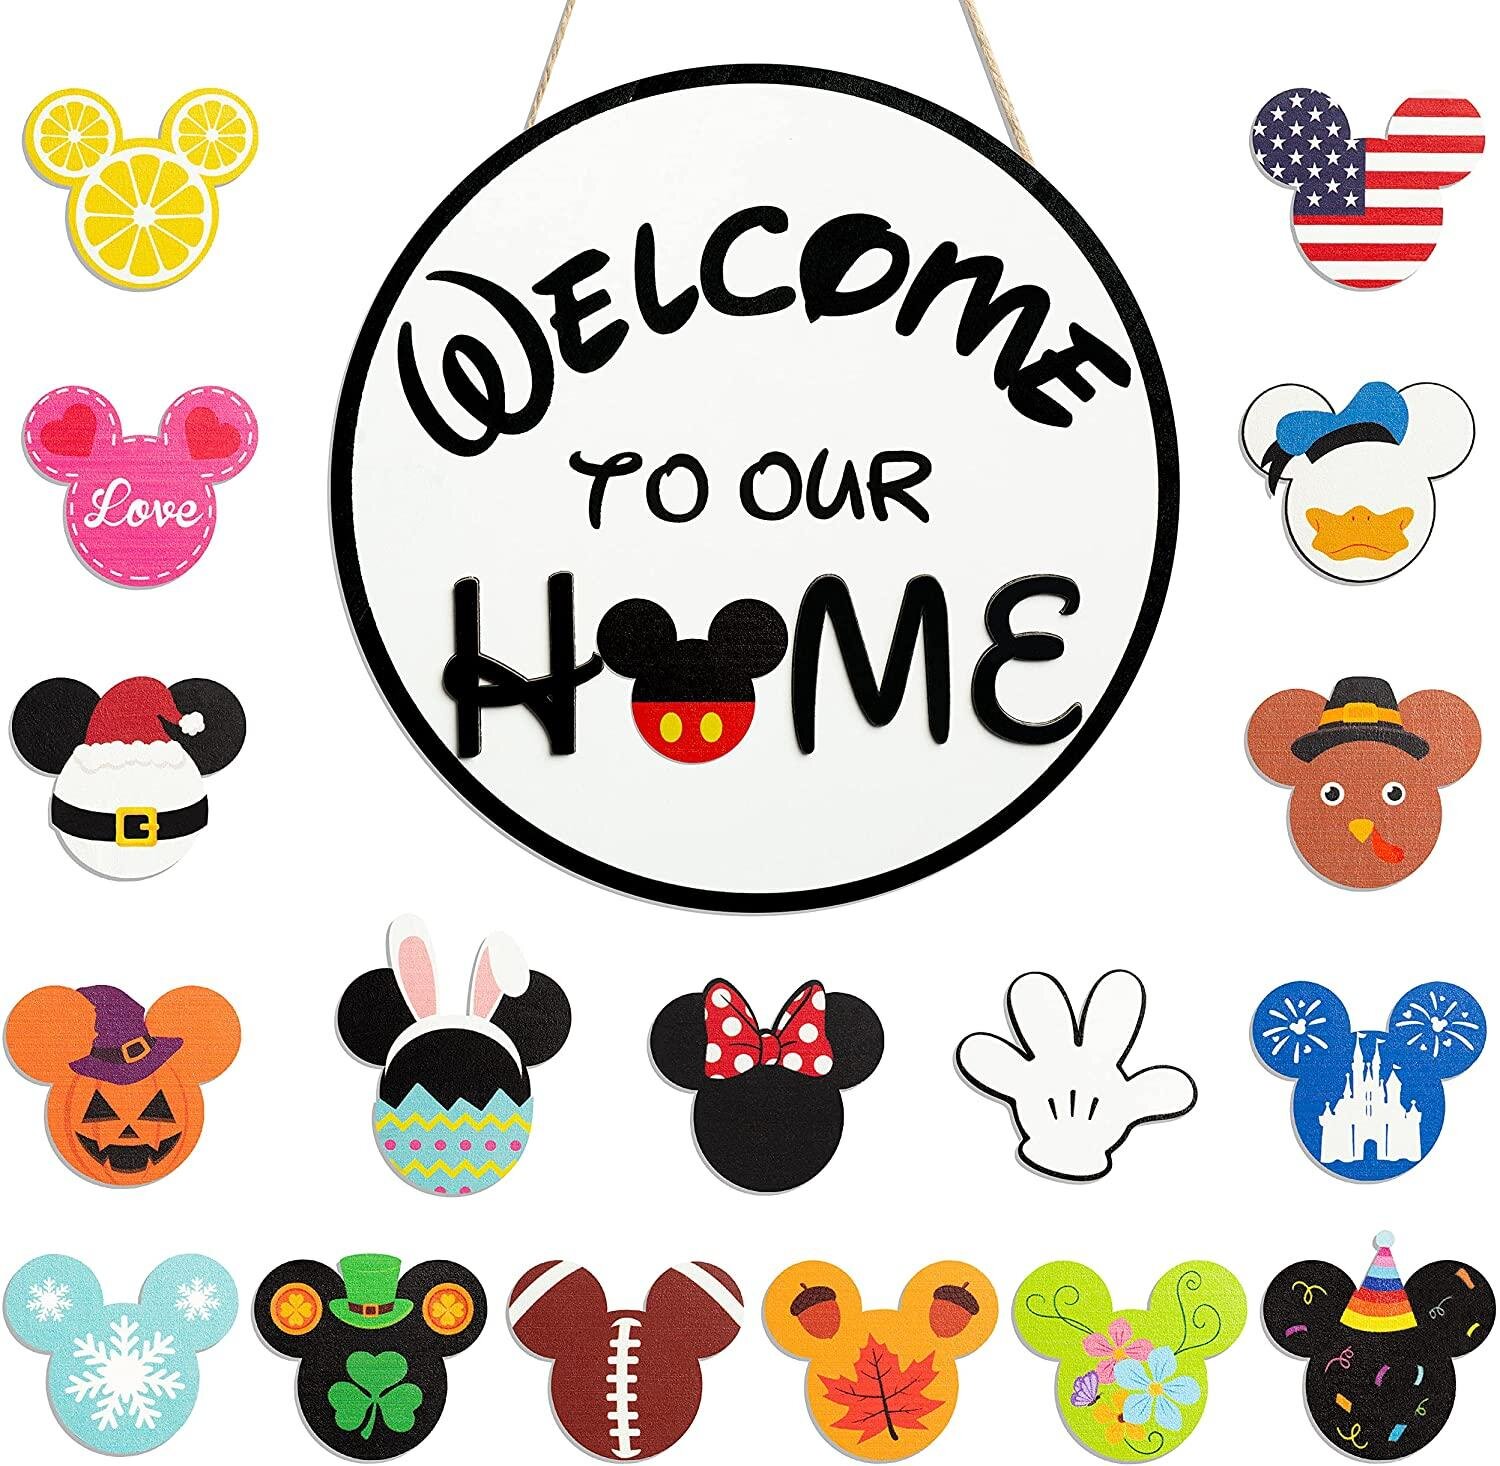 Come In We Are Awesome 12" Round Metal Sign Welcome Fun Novelty Home Wall Decor 